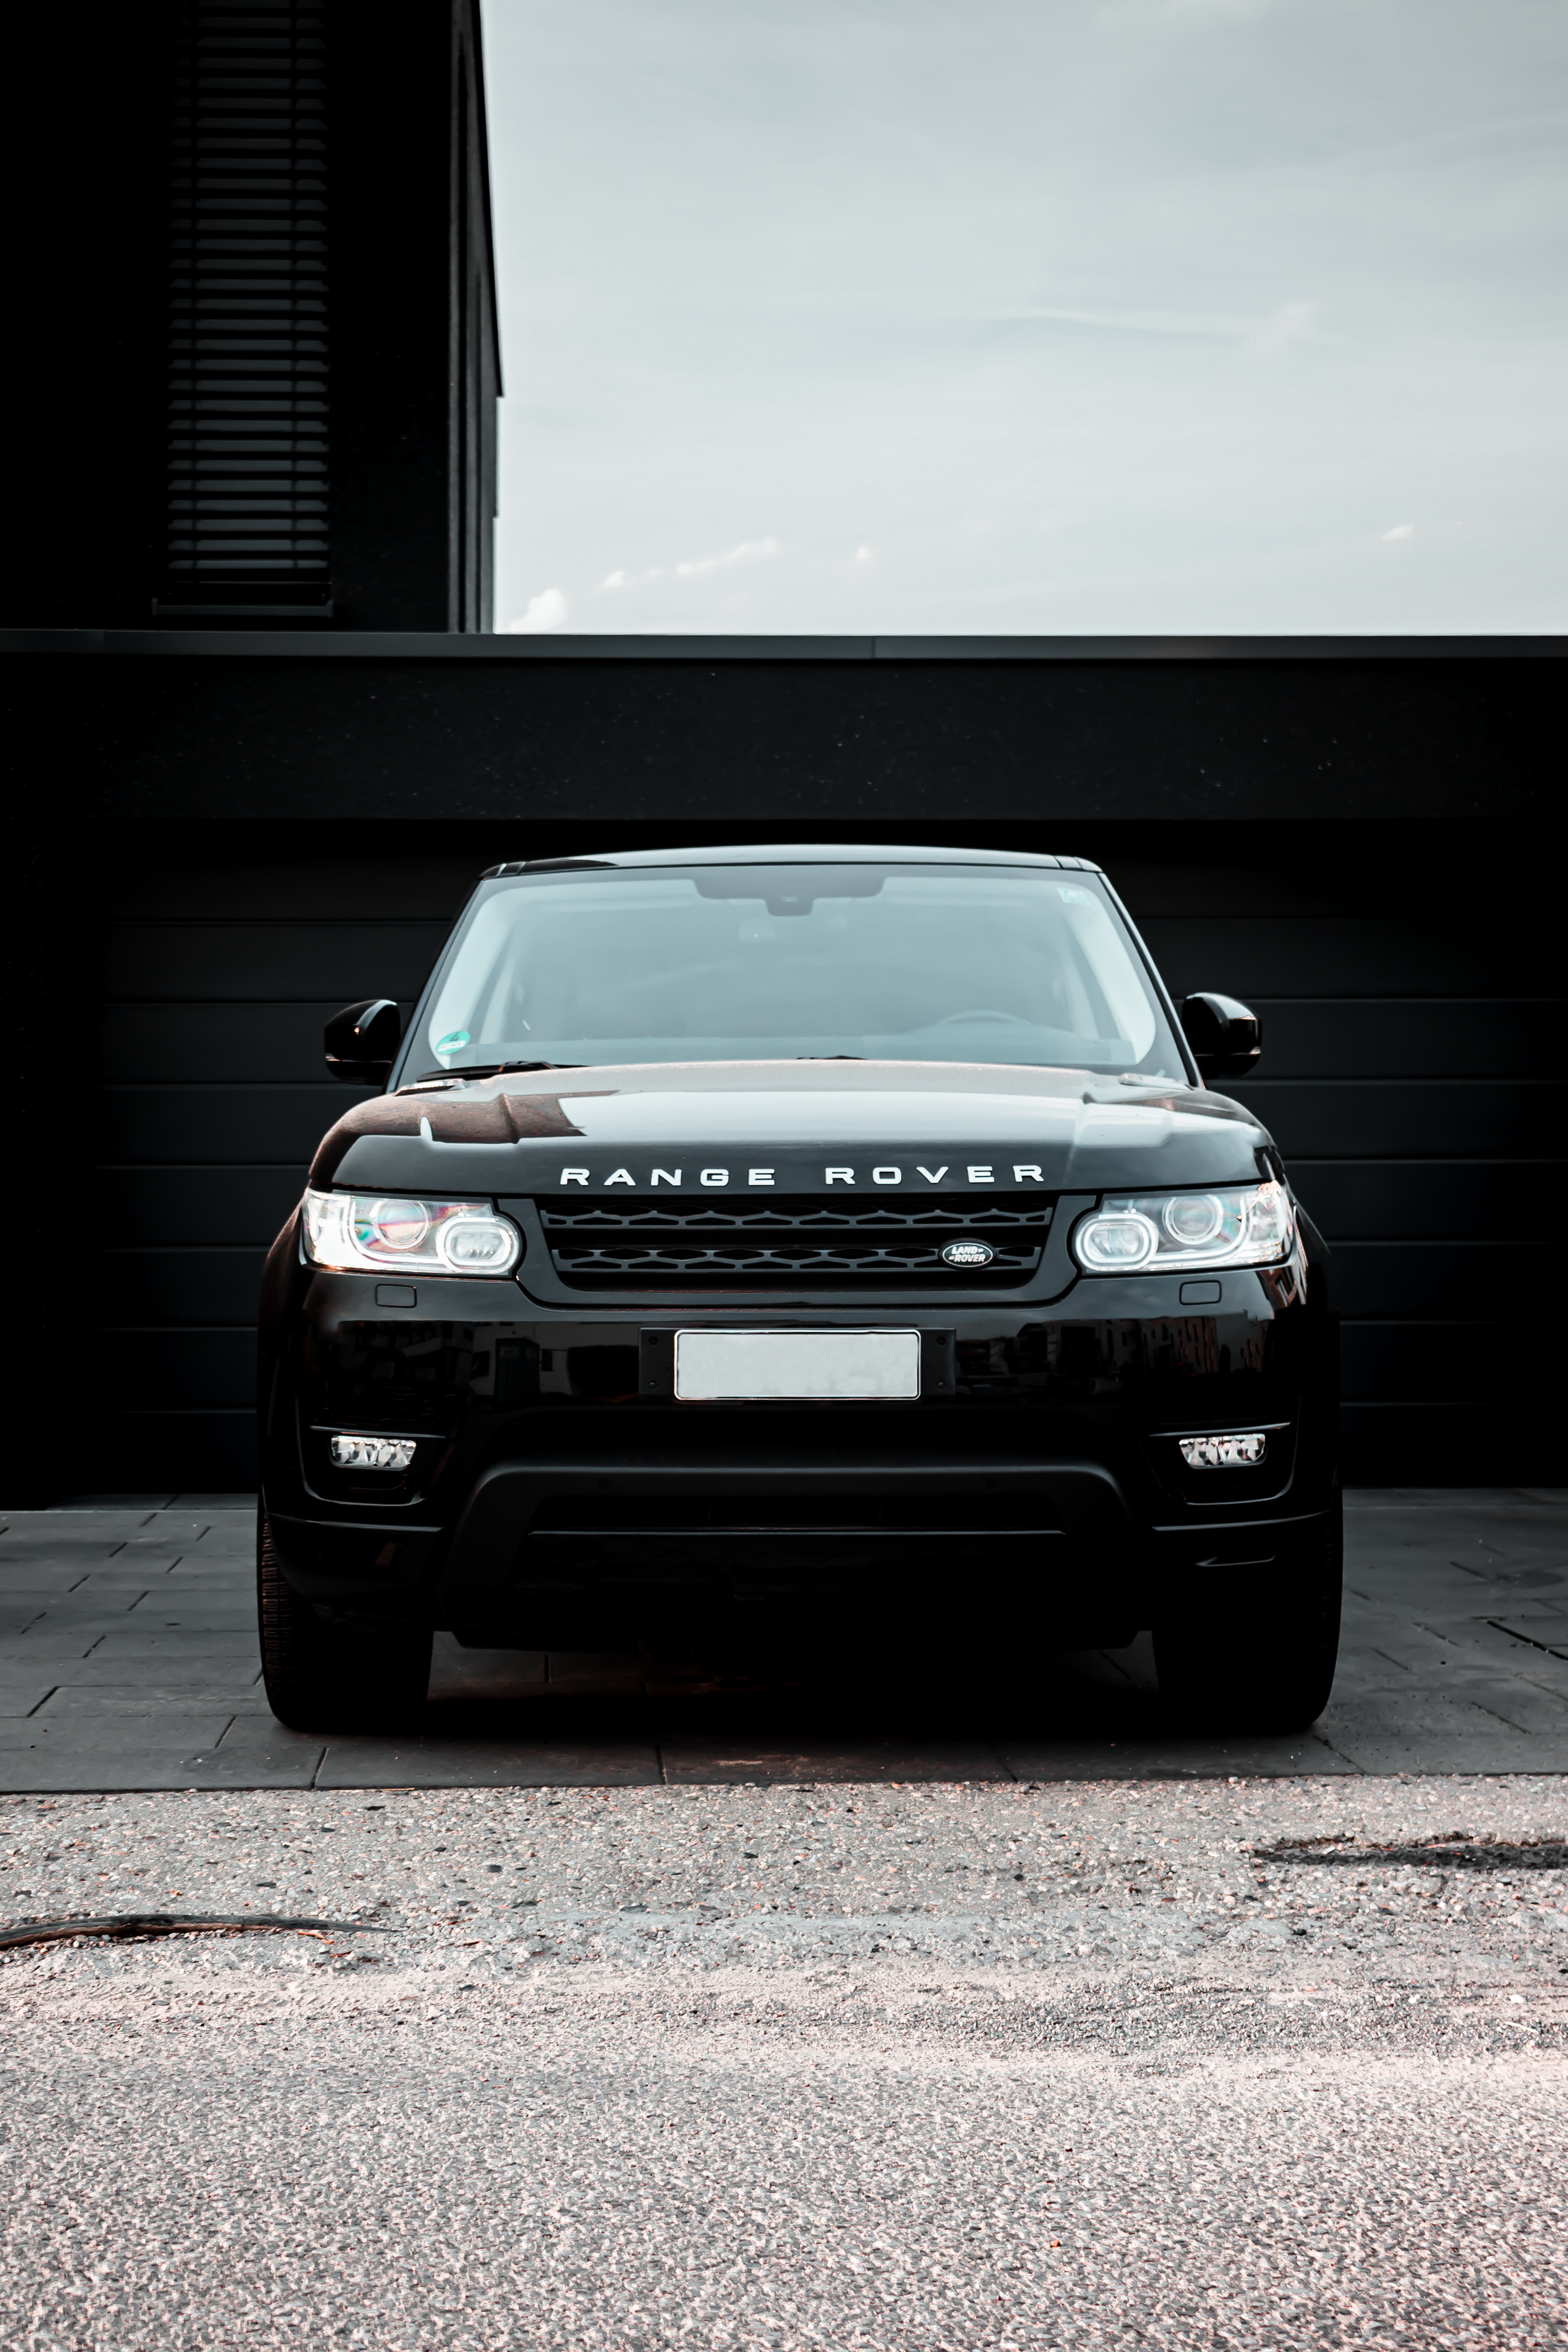 range rover, suv, land rover, front view, cars, black, car, machine